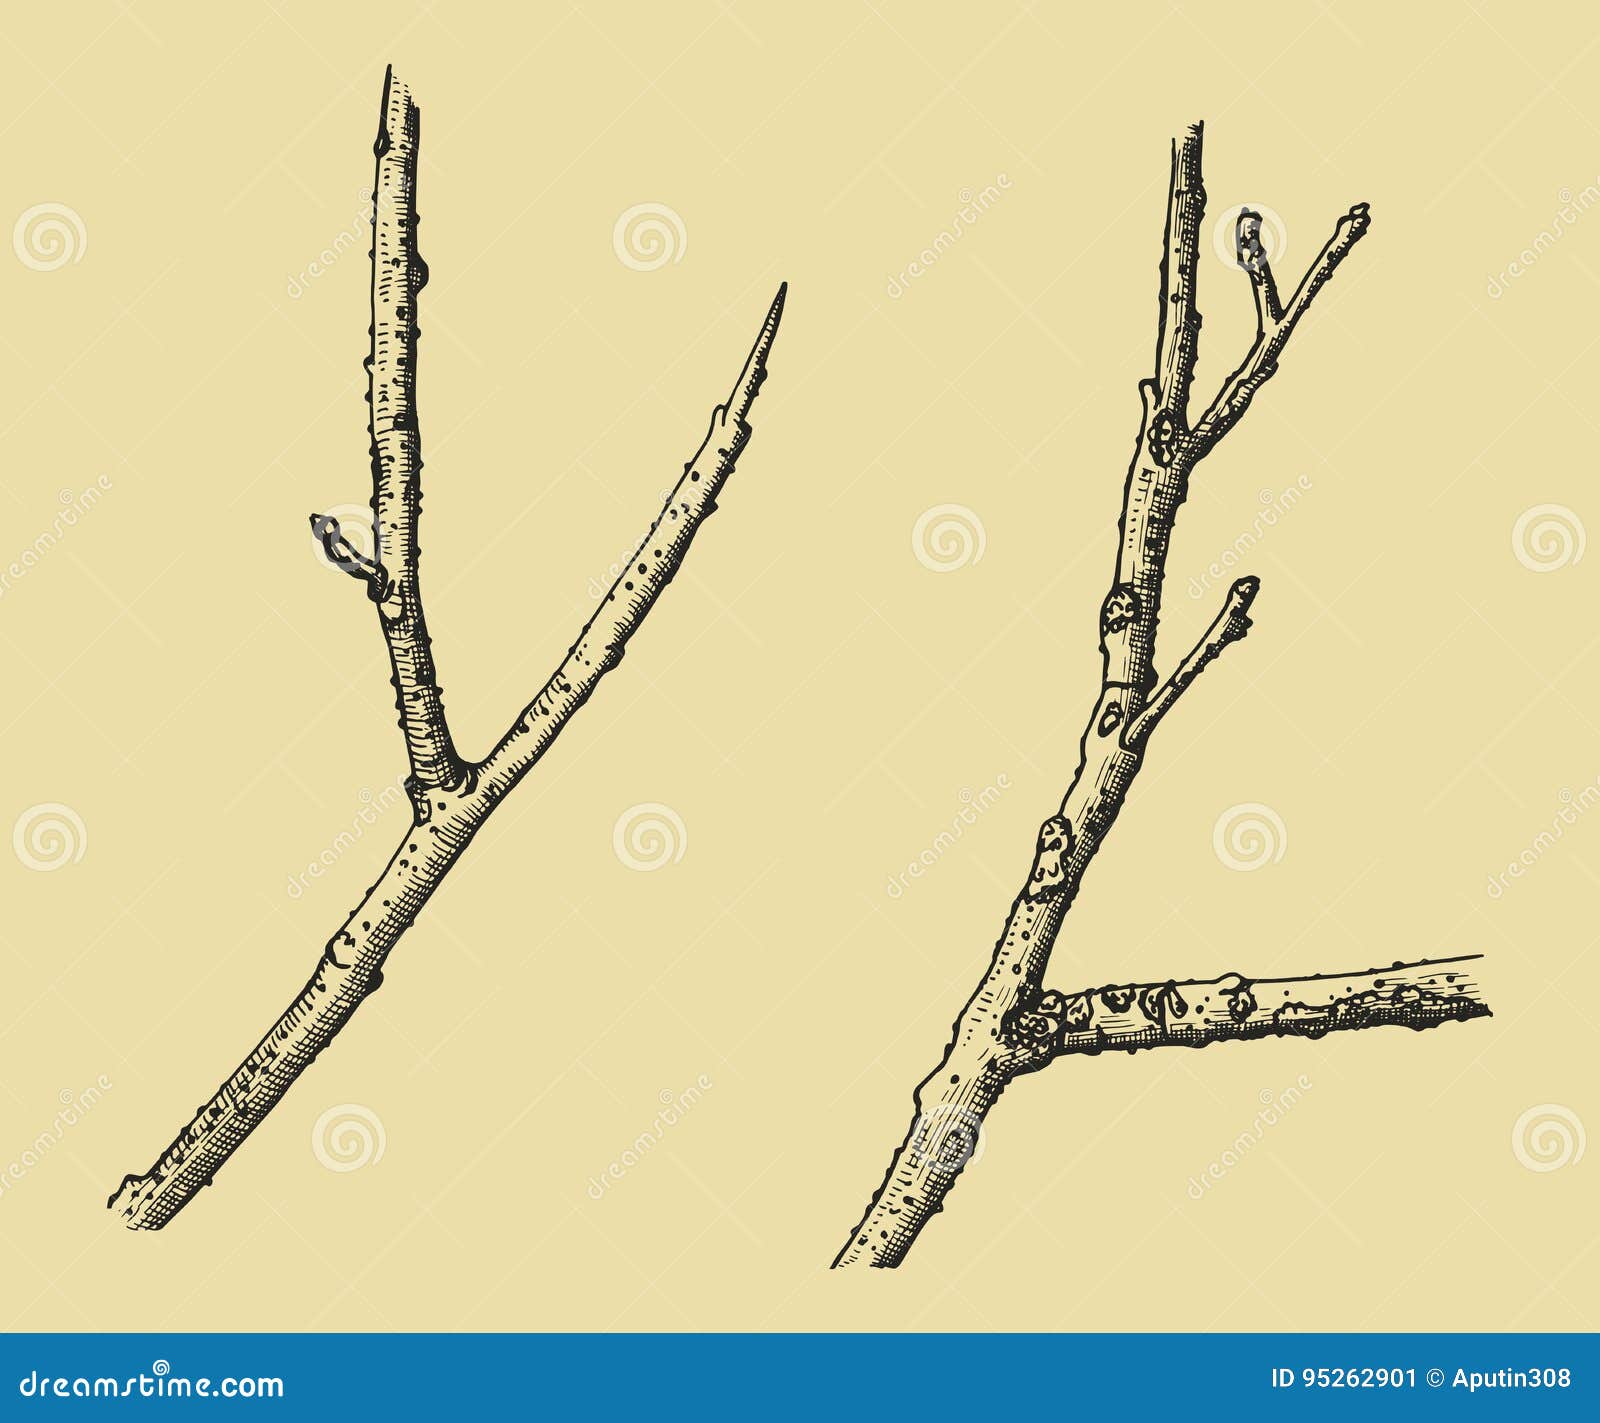 Simple doodle sketch floral twig with leaves Vector Image